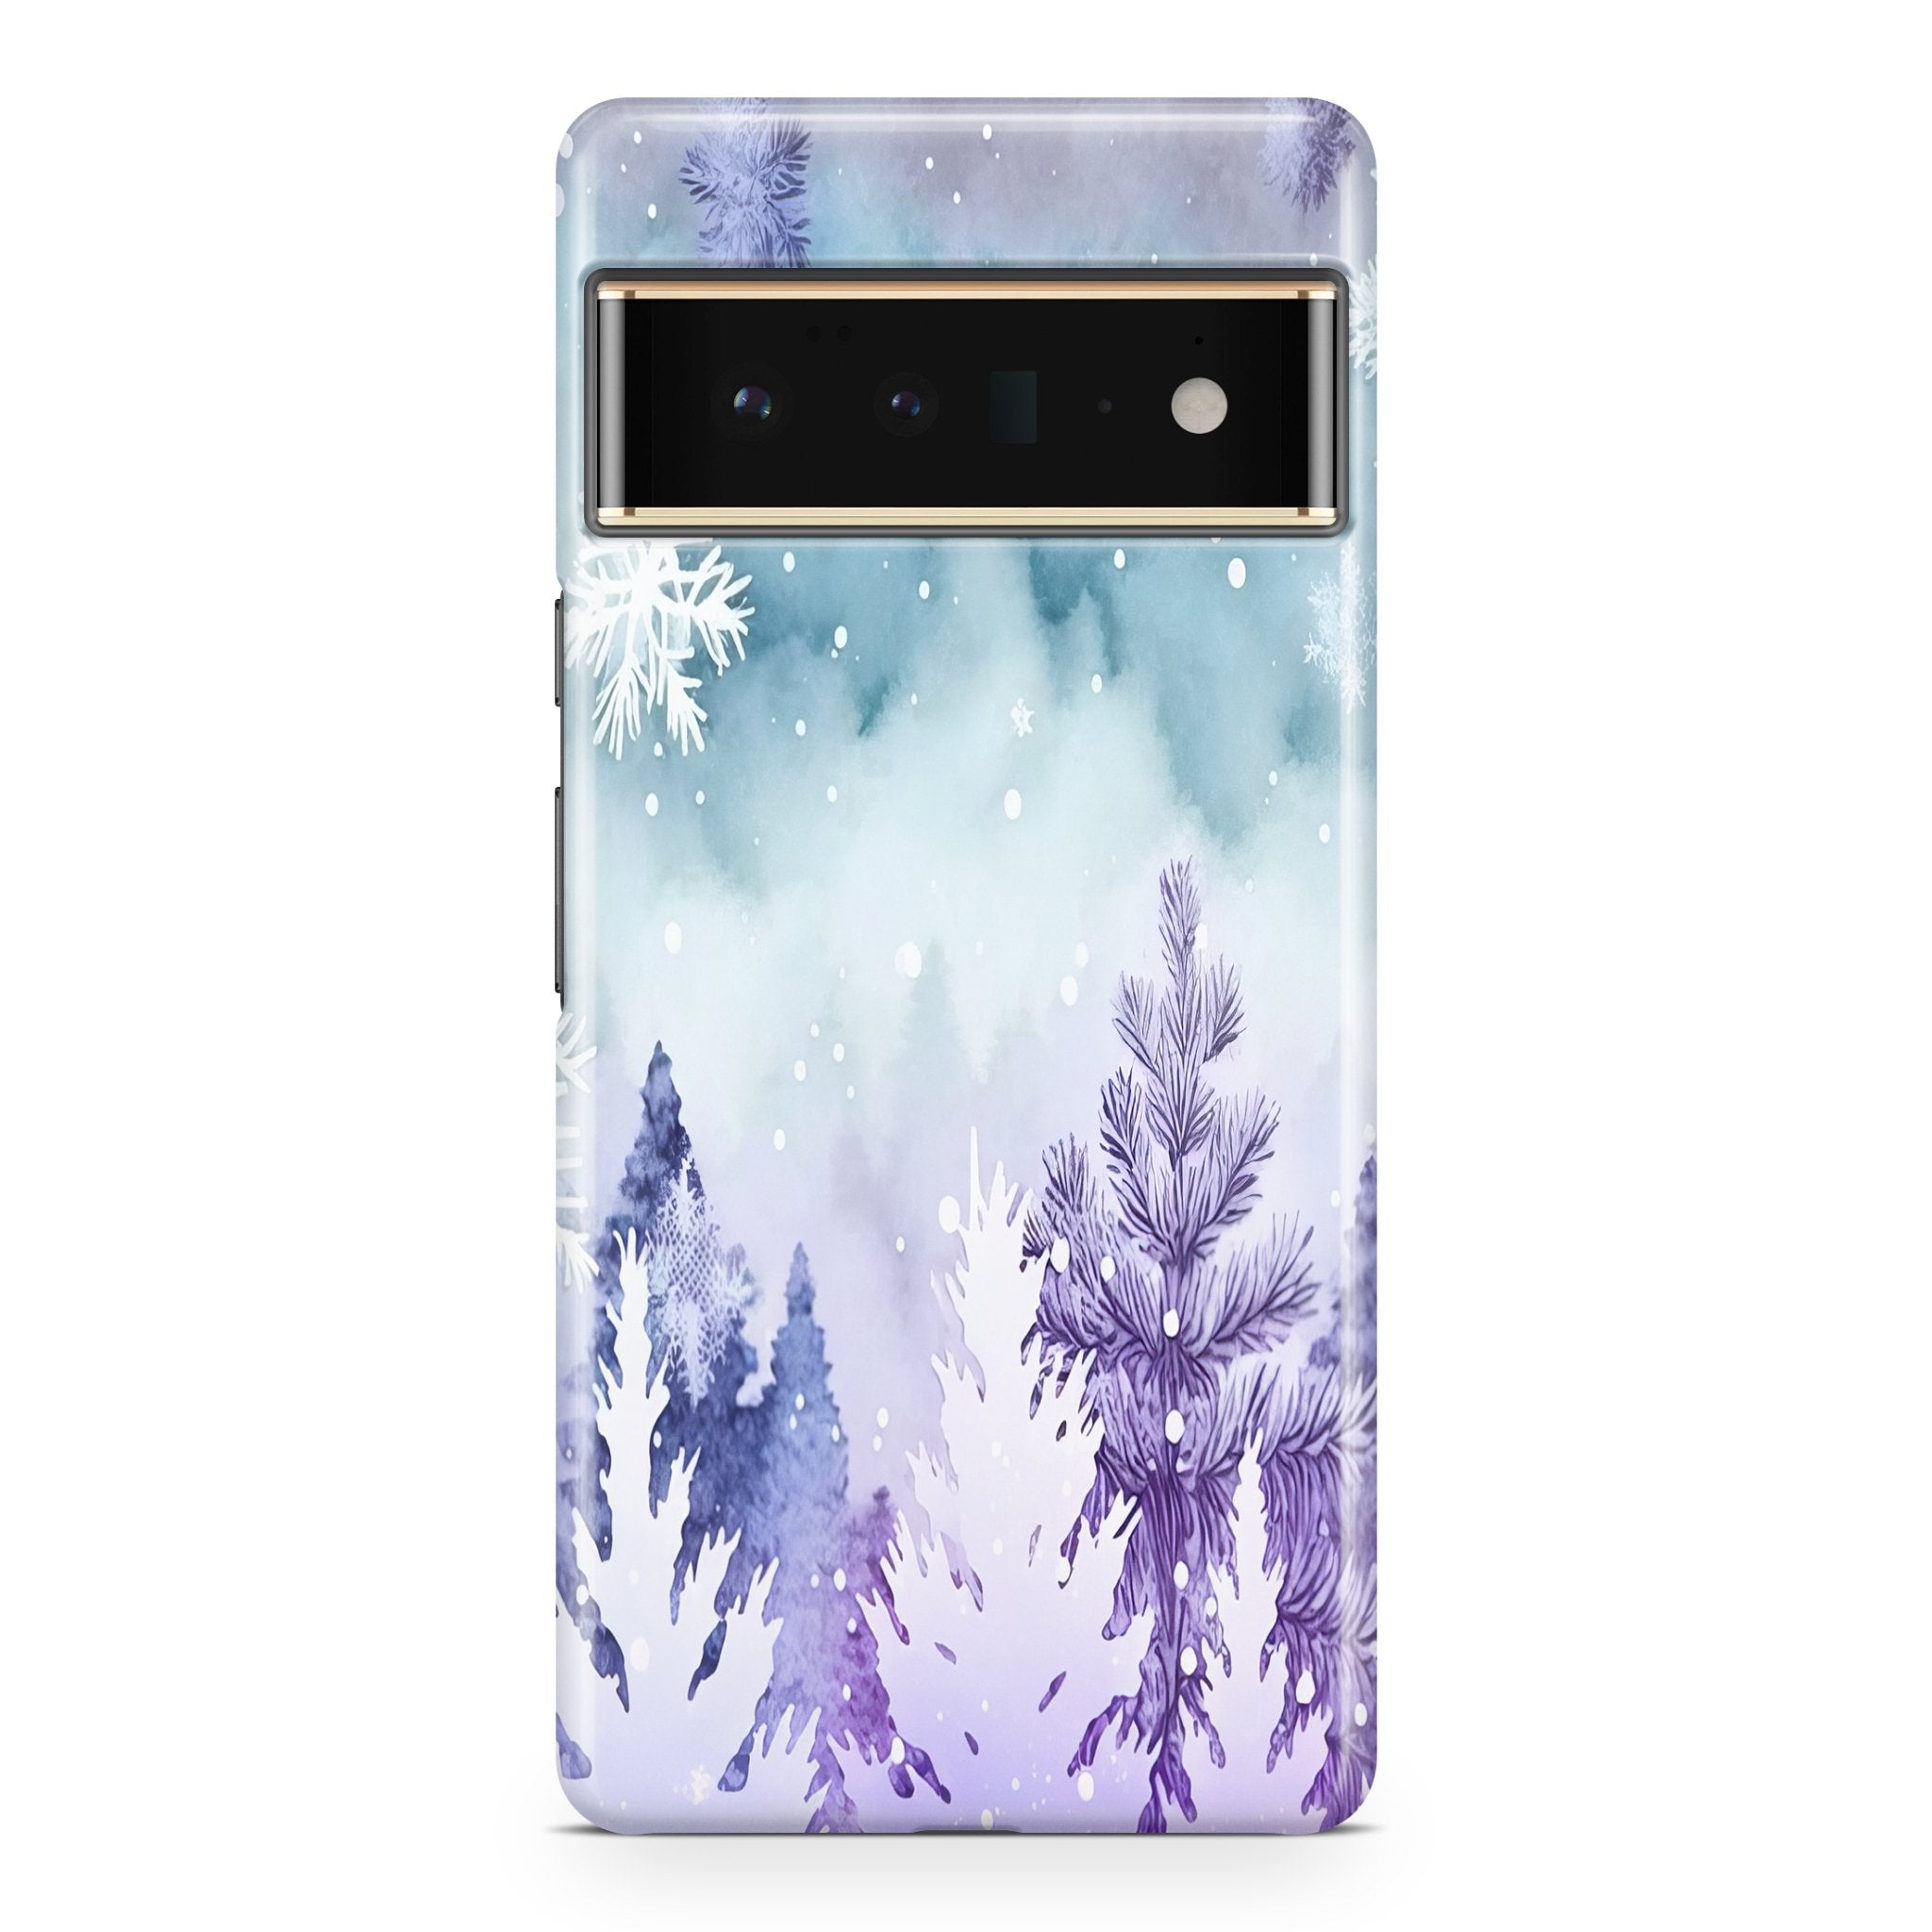 Quiet Snowfall - Google phone case designs by CaseSwagger